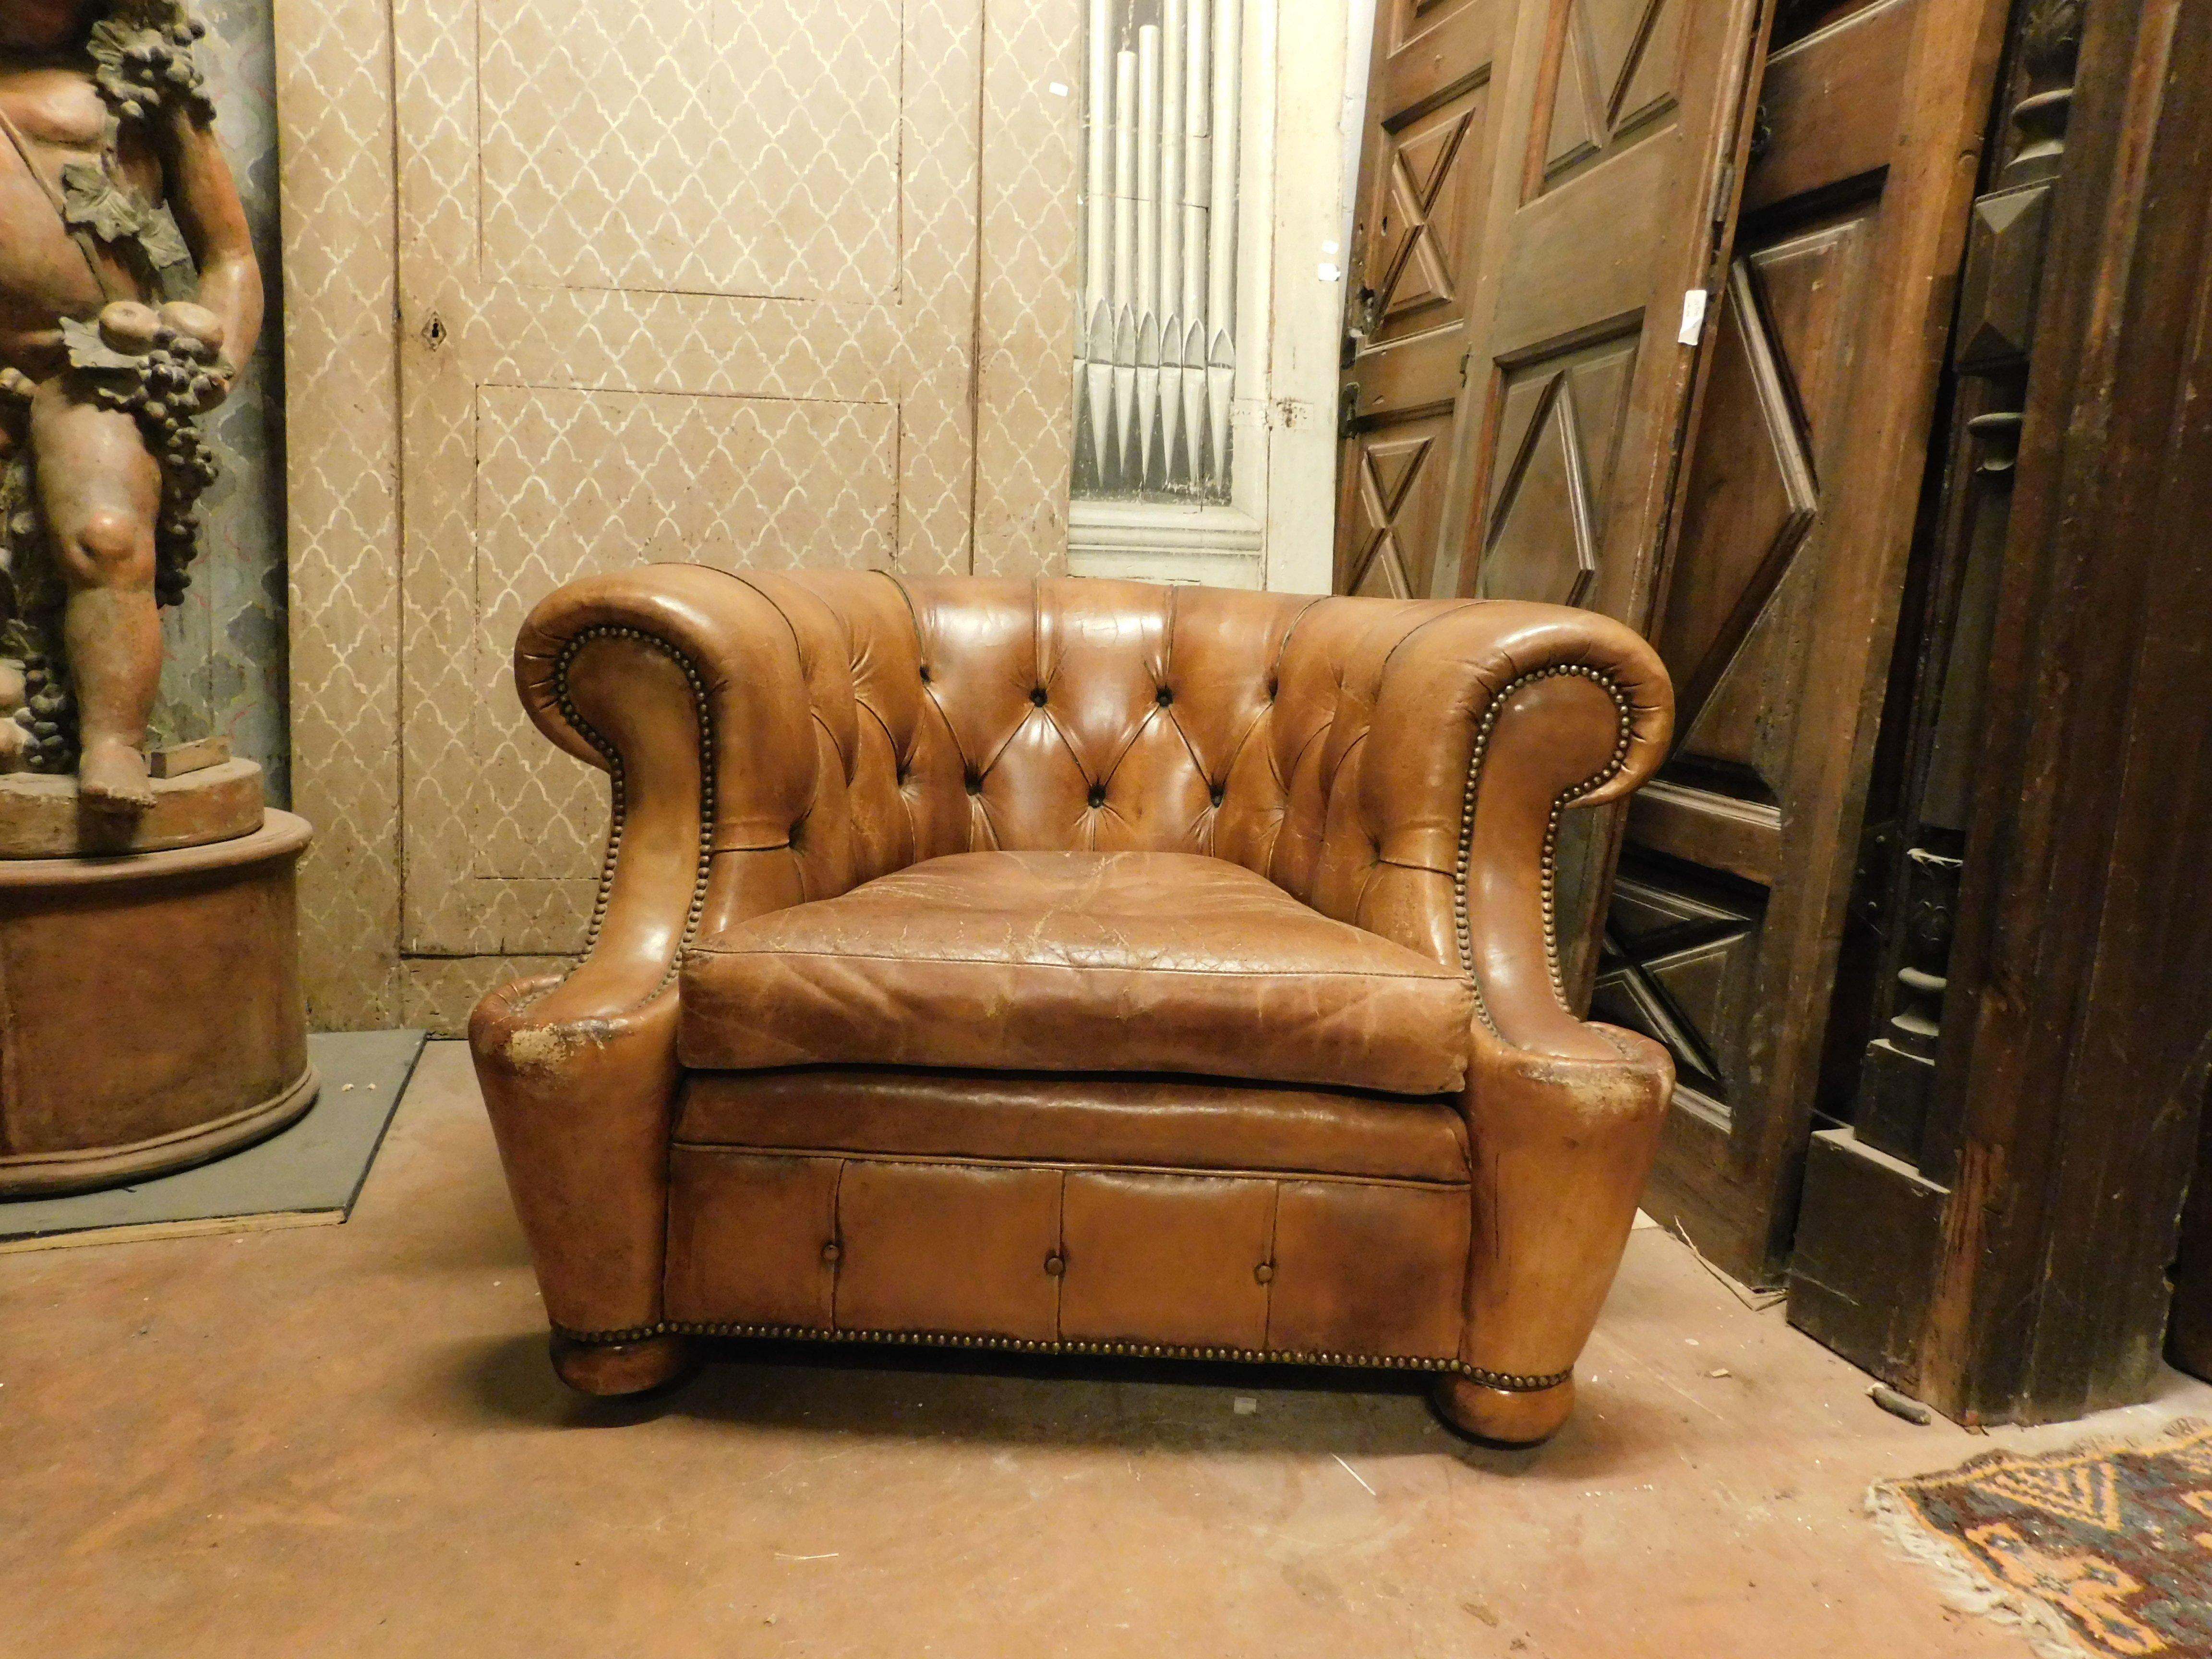 Vintage leather armchair, with Chesterfield-type buttons, built in Italy in the mid-1900s.
Beautiful patina of time but excellent conservation conditions, beautiful and single, valuable.
size cm w 100 x H 70 x D 90, seat height cm 42